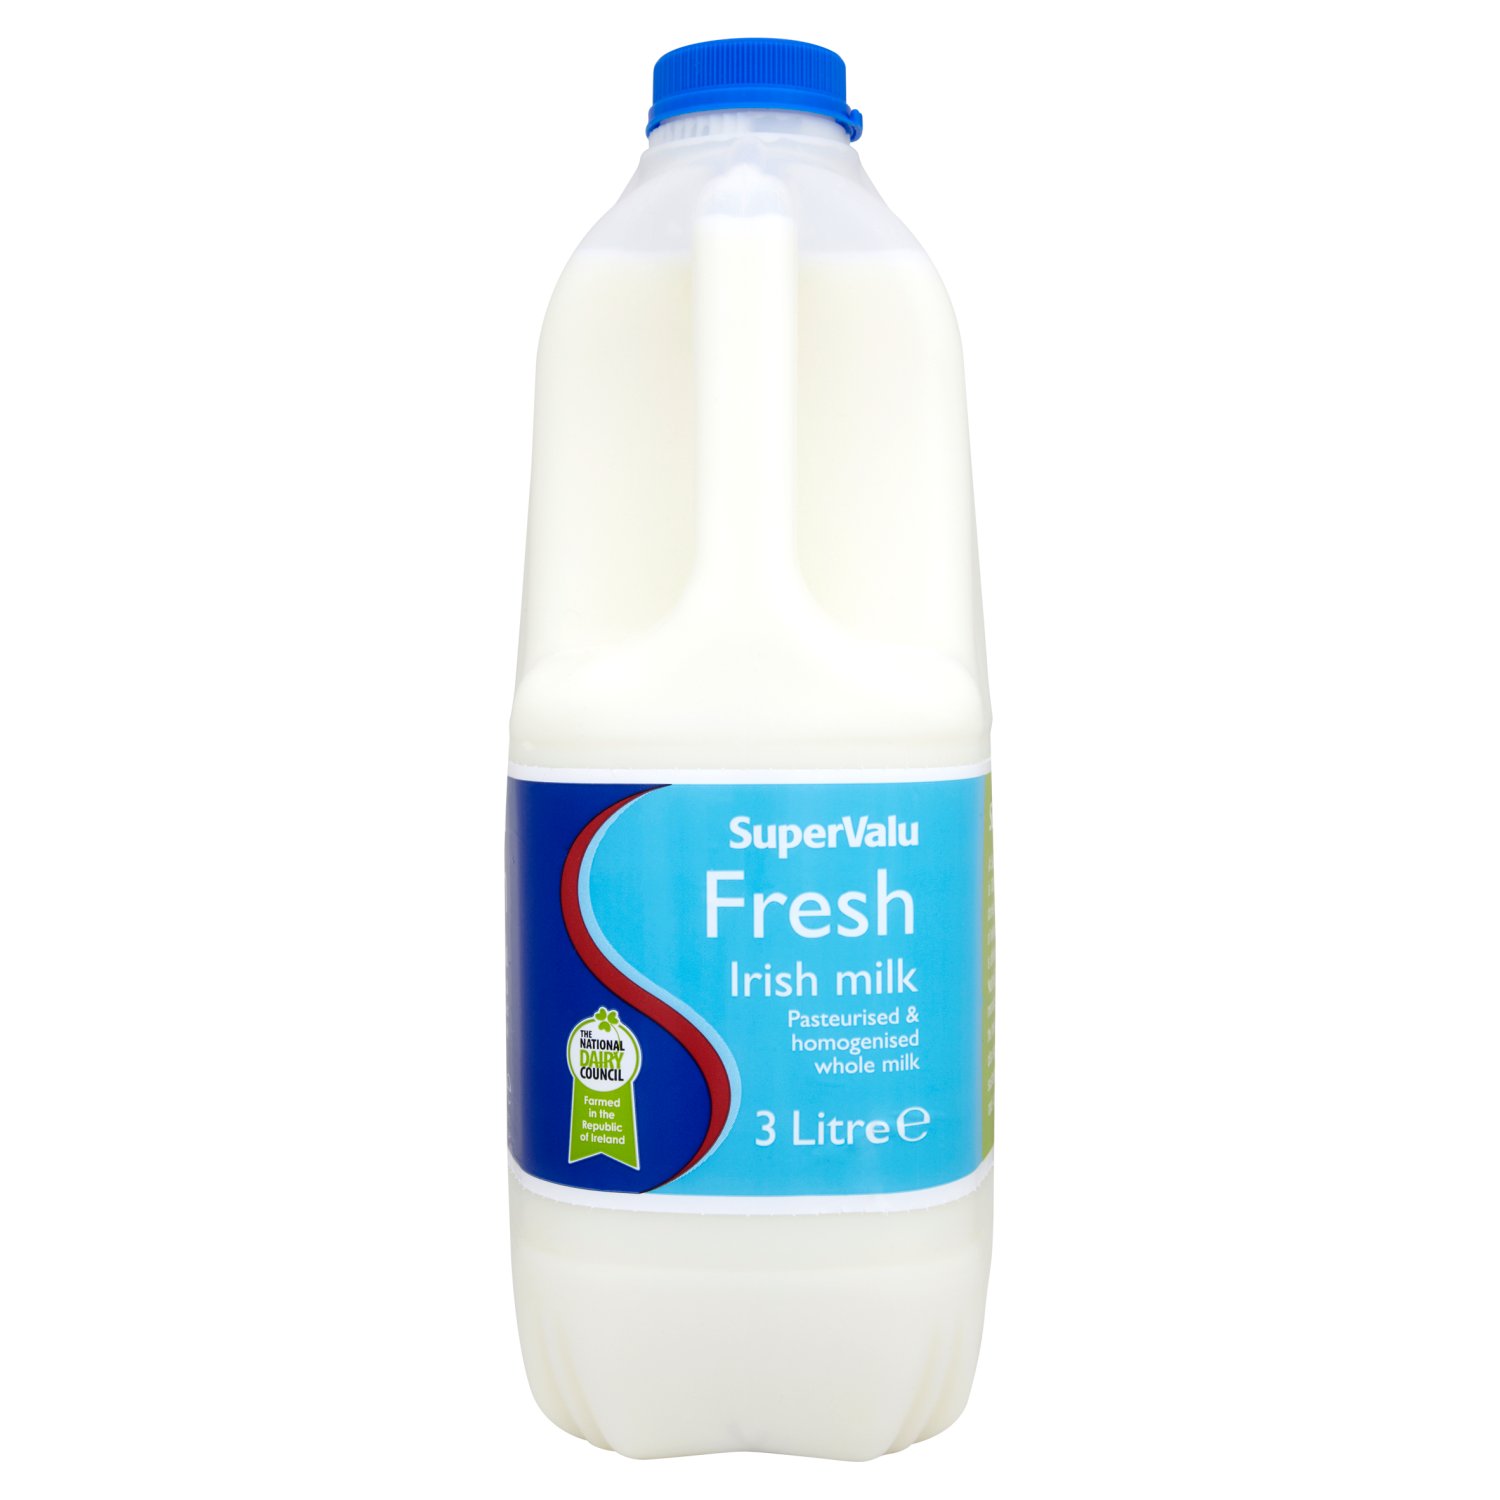 At SuperValu, our milk is 100% sourced from dairies in the Republic of Ireland. Each dairy is affiliated with the National Dairy Council, meaning you can enjoy the freshest milk while also supporting sustainable farming and 4,600 Irish jobs.